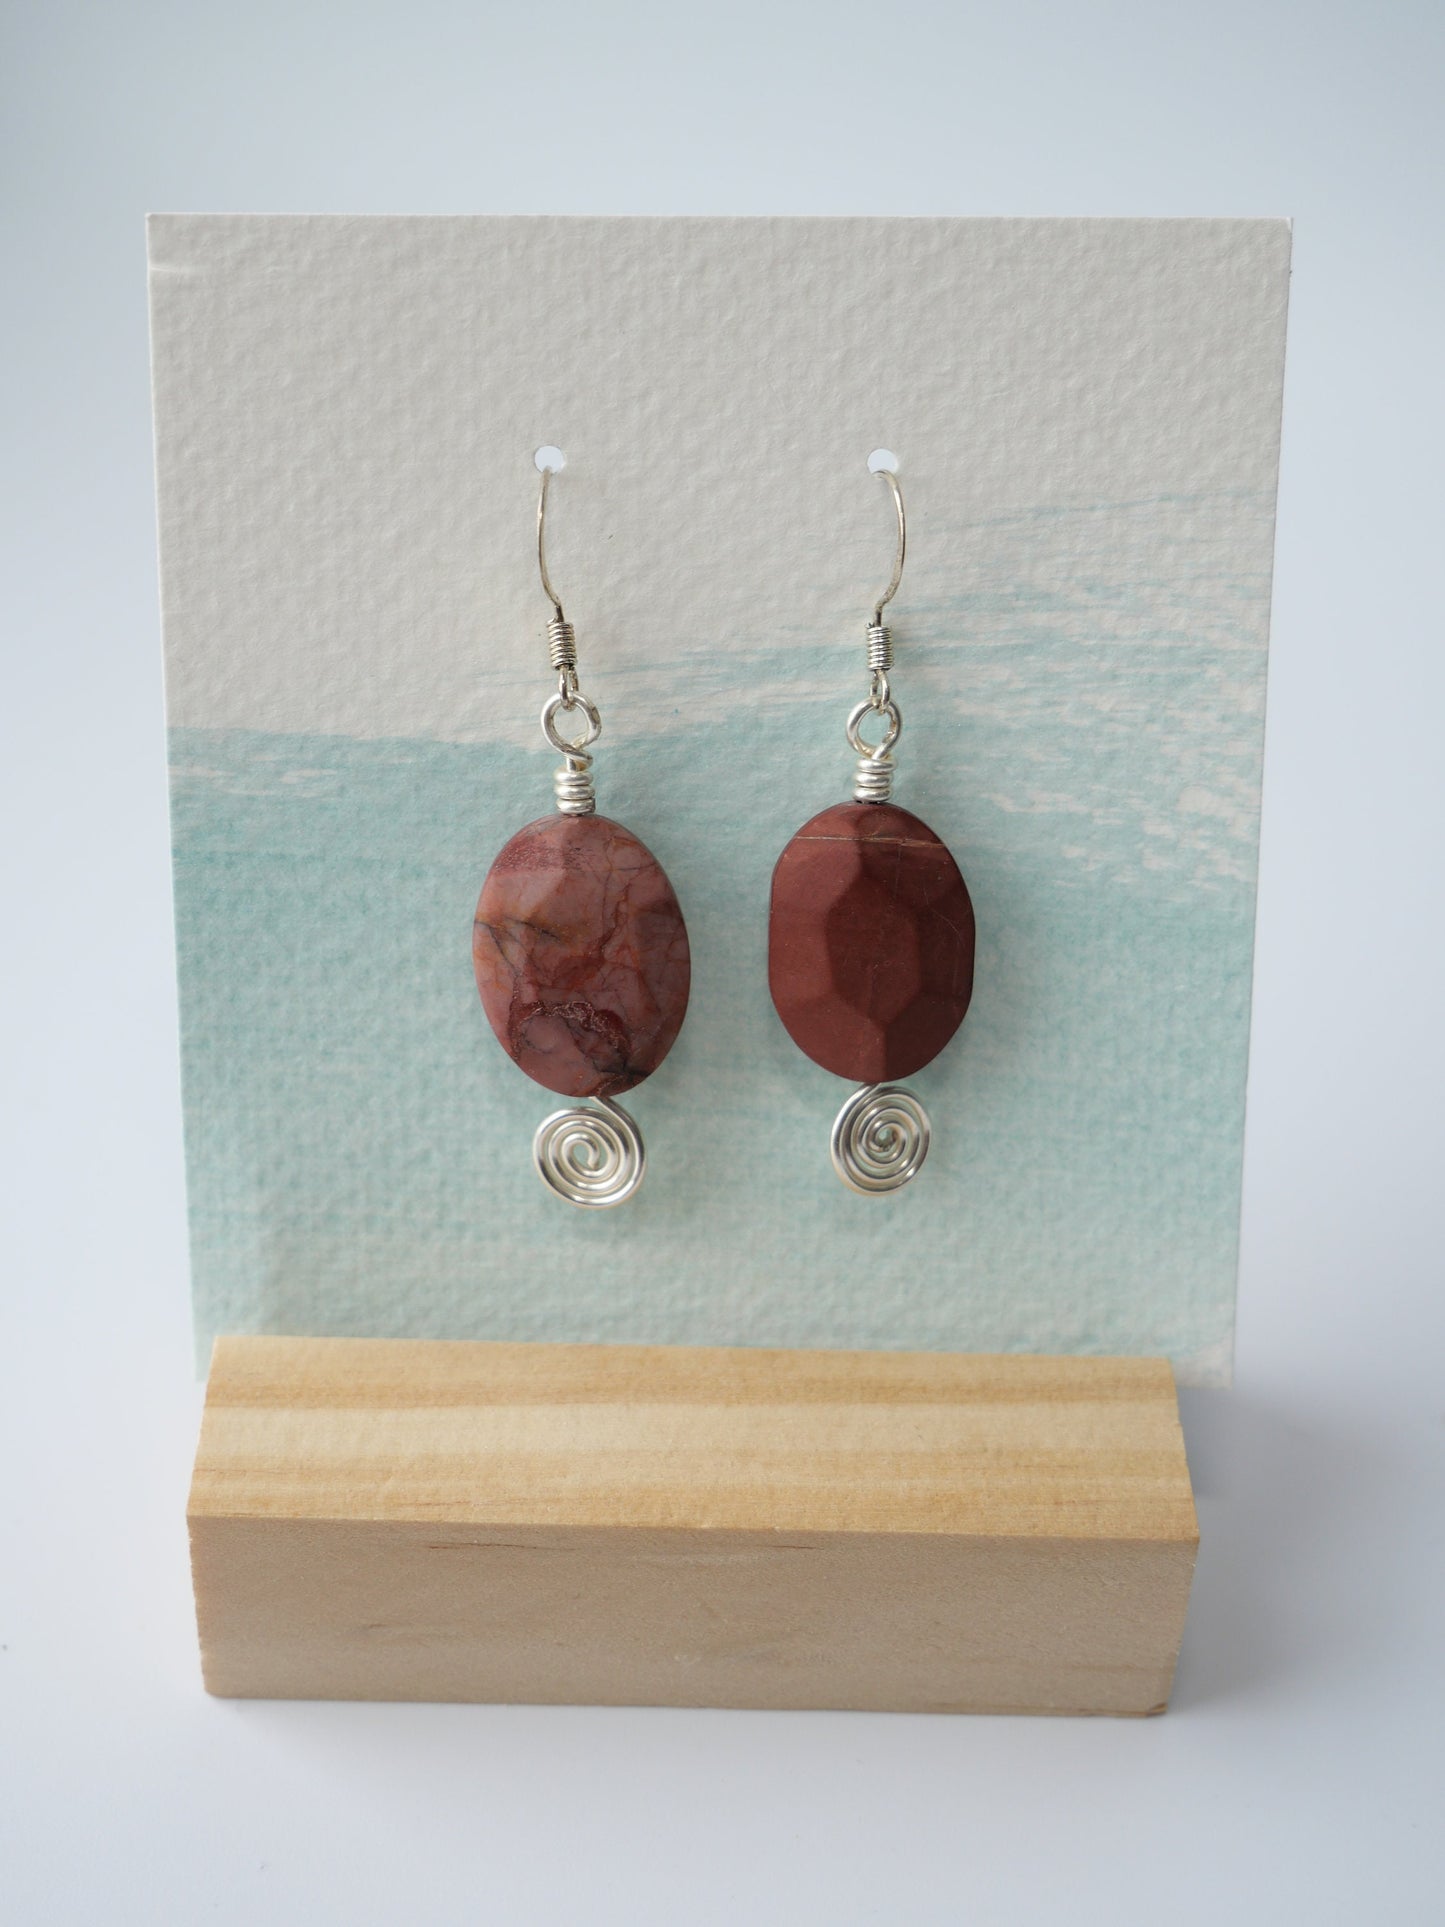 Silver, Geometric Spiral, Red Jasper Dangle Earrings, Hypoallergenic, Made in Maine, Inspired by Maine